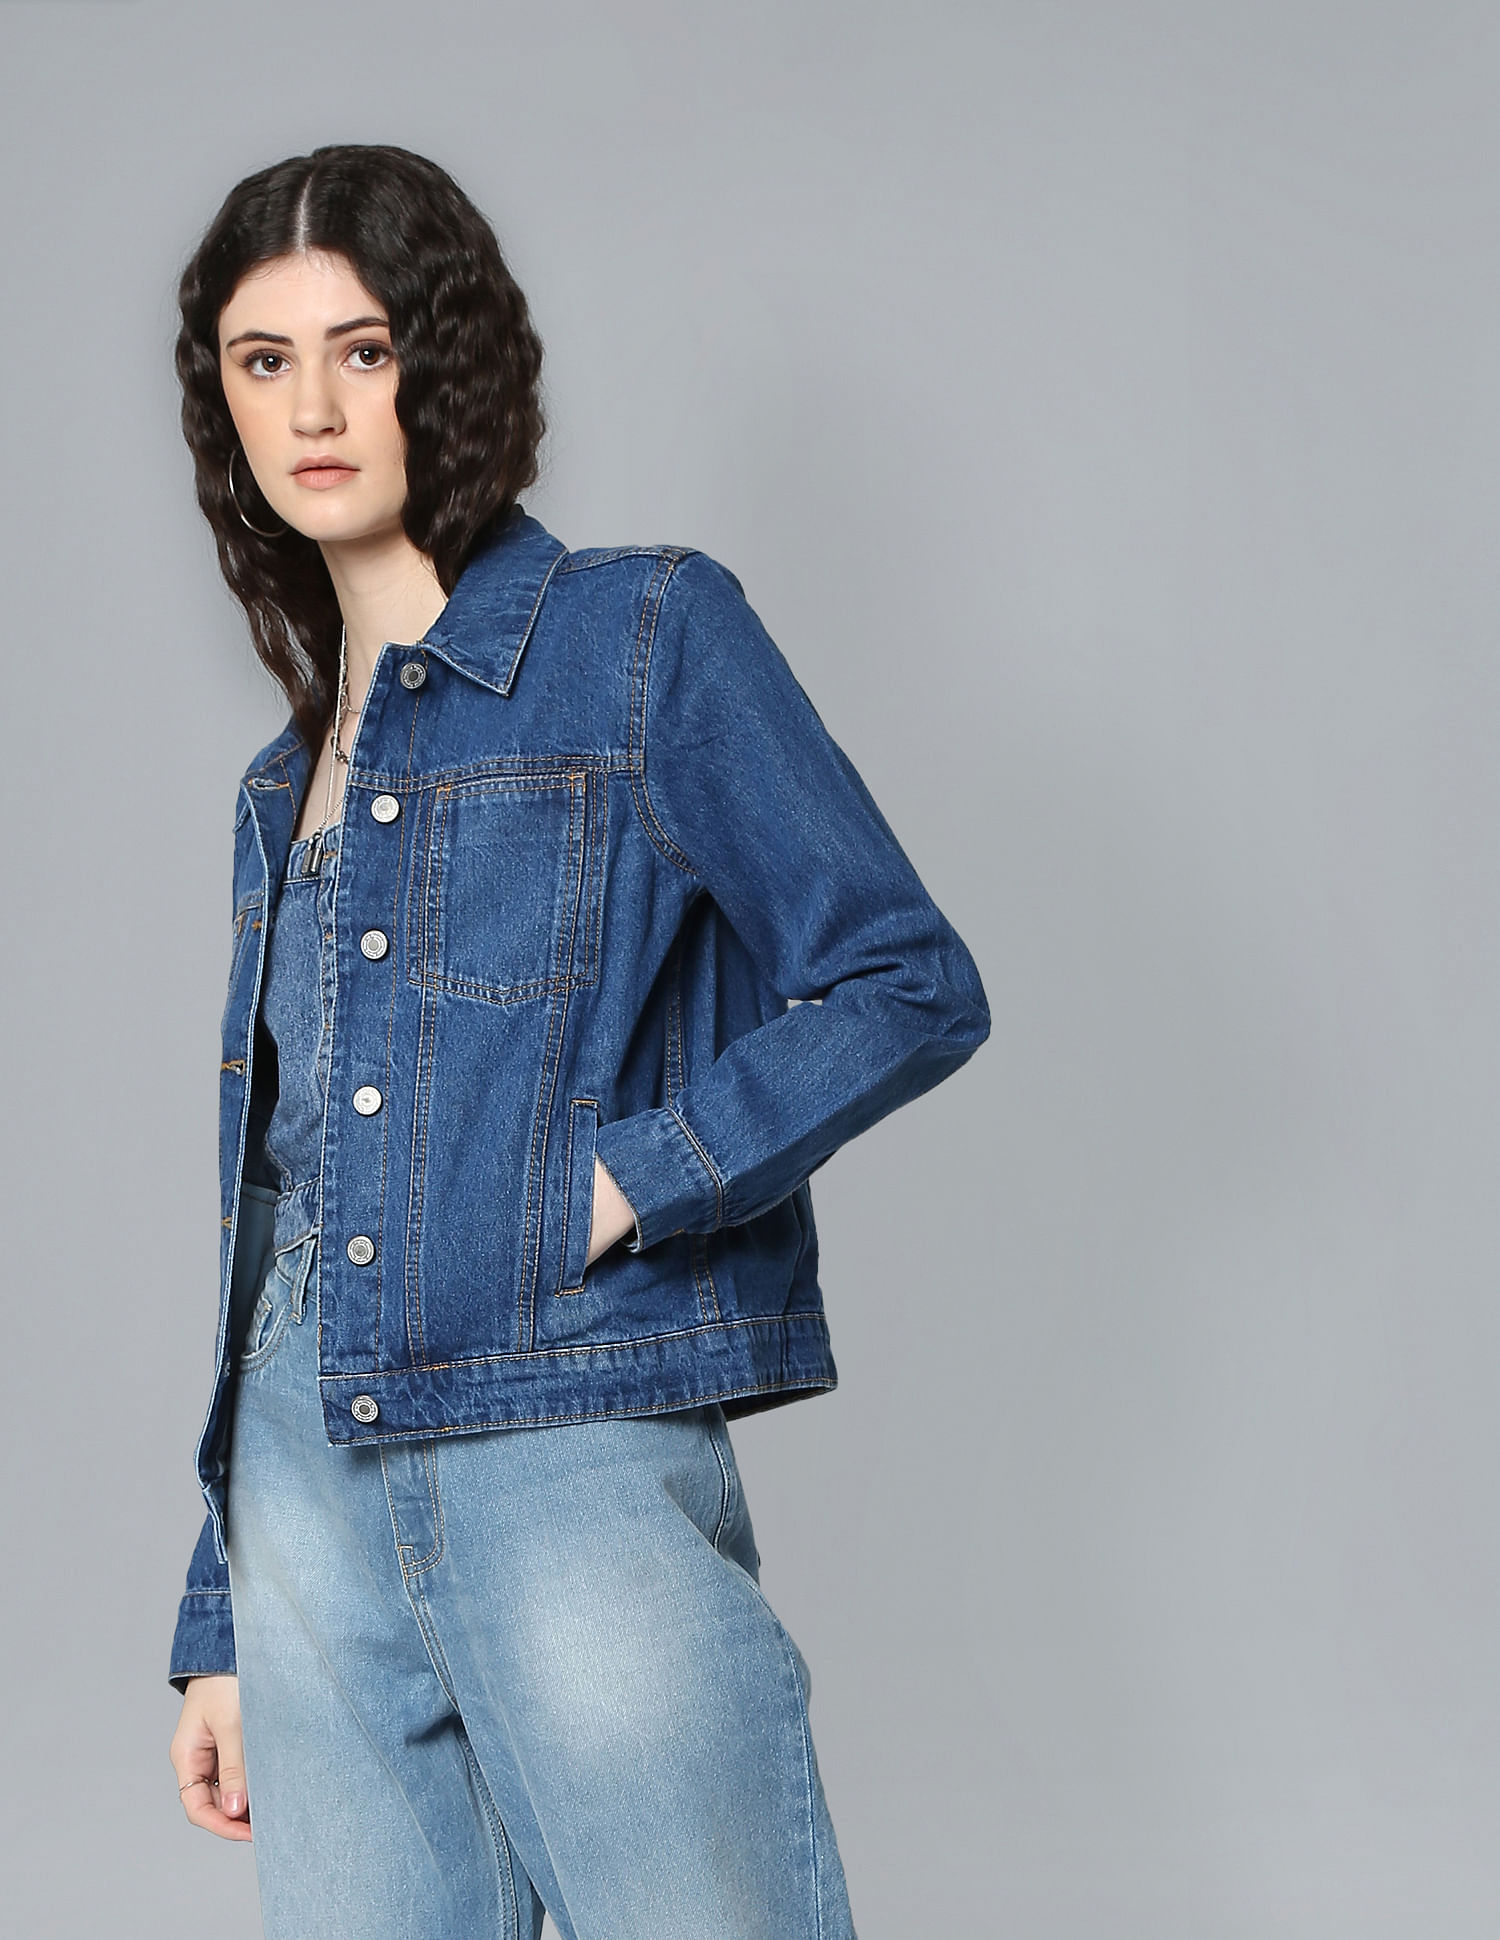 Pepe Jeans Full Sleeve Washed Women Denim Jacket - Buy Pepe Jeans Full  Sleeve Washed Women Denim Jacket Online at Best Prices in India |  Flipkart.com